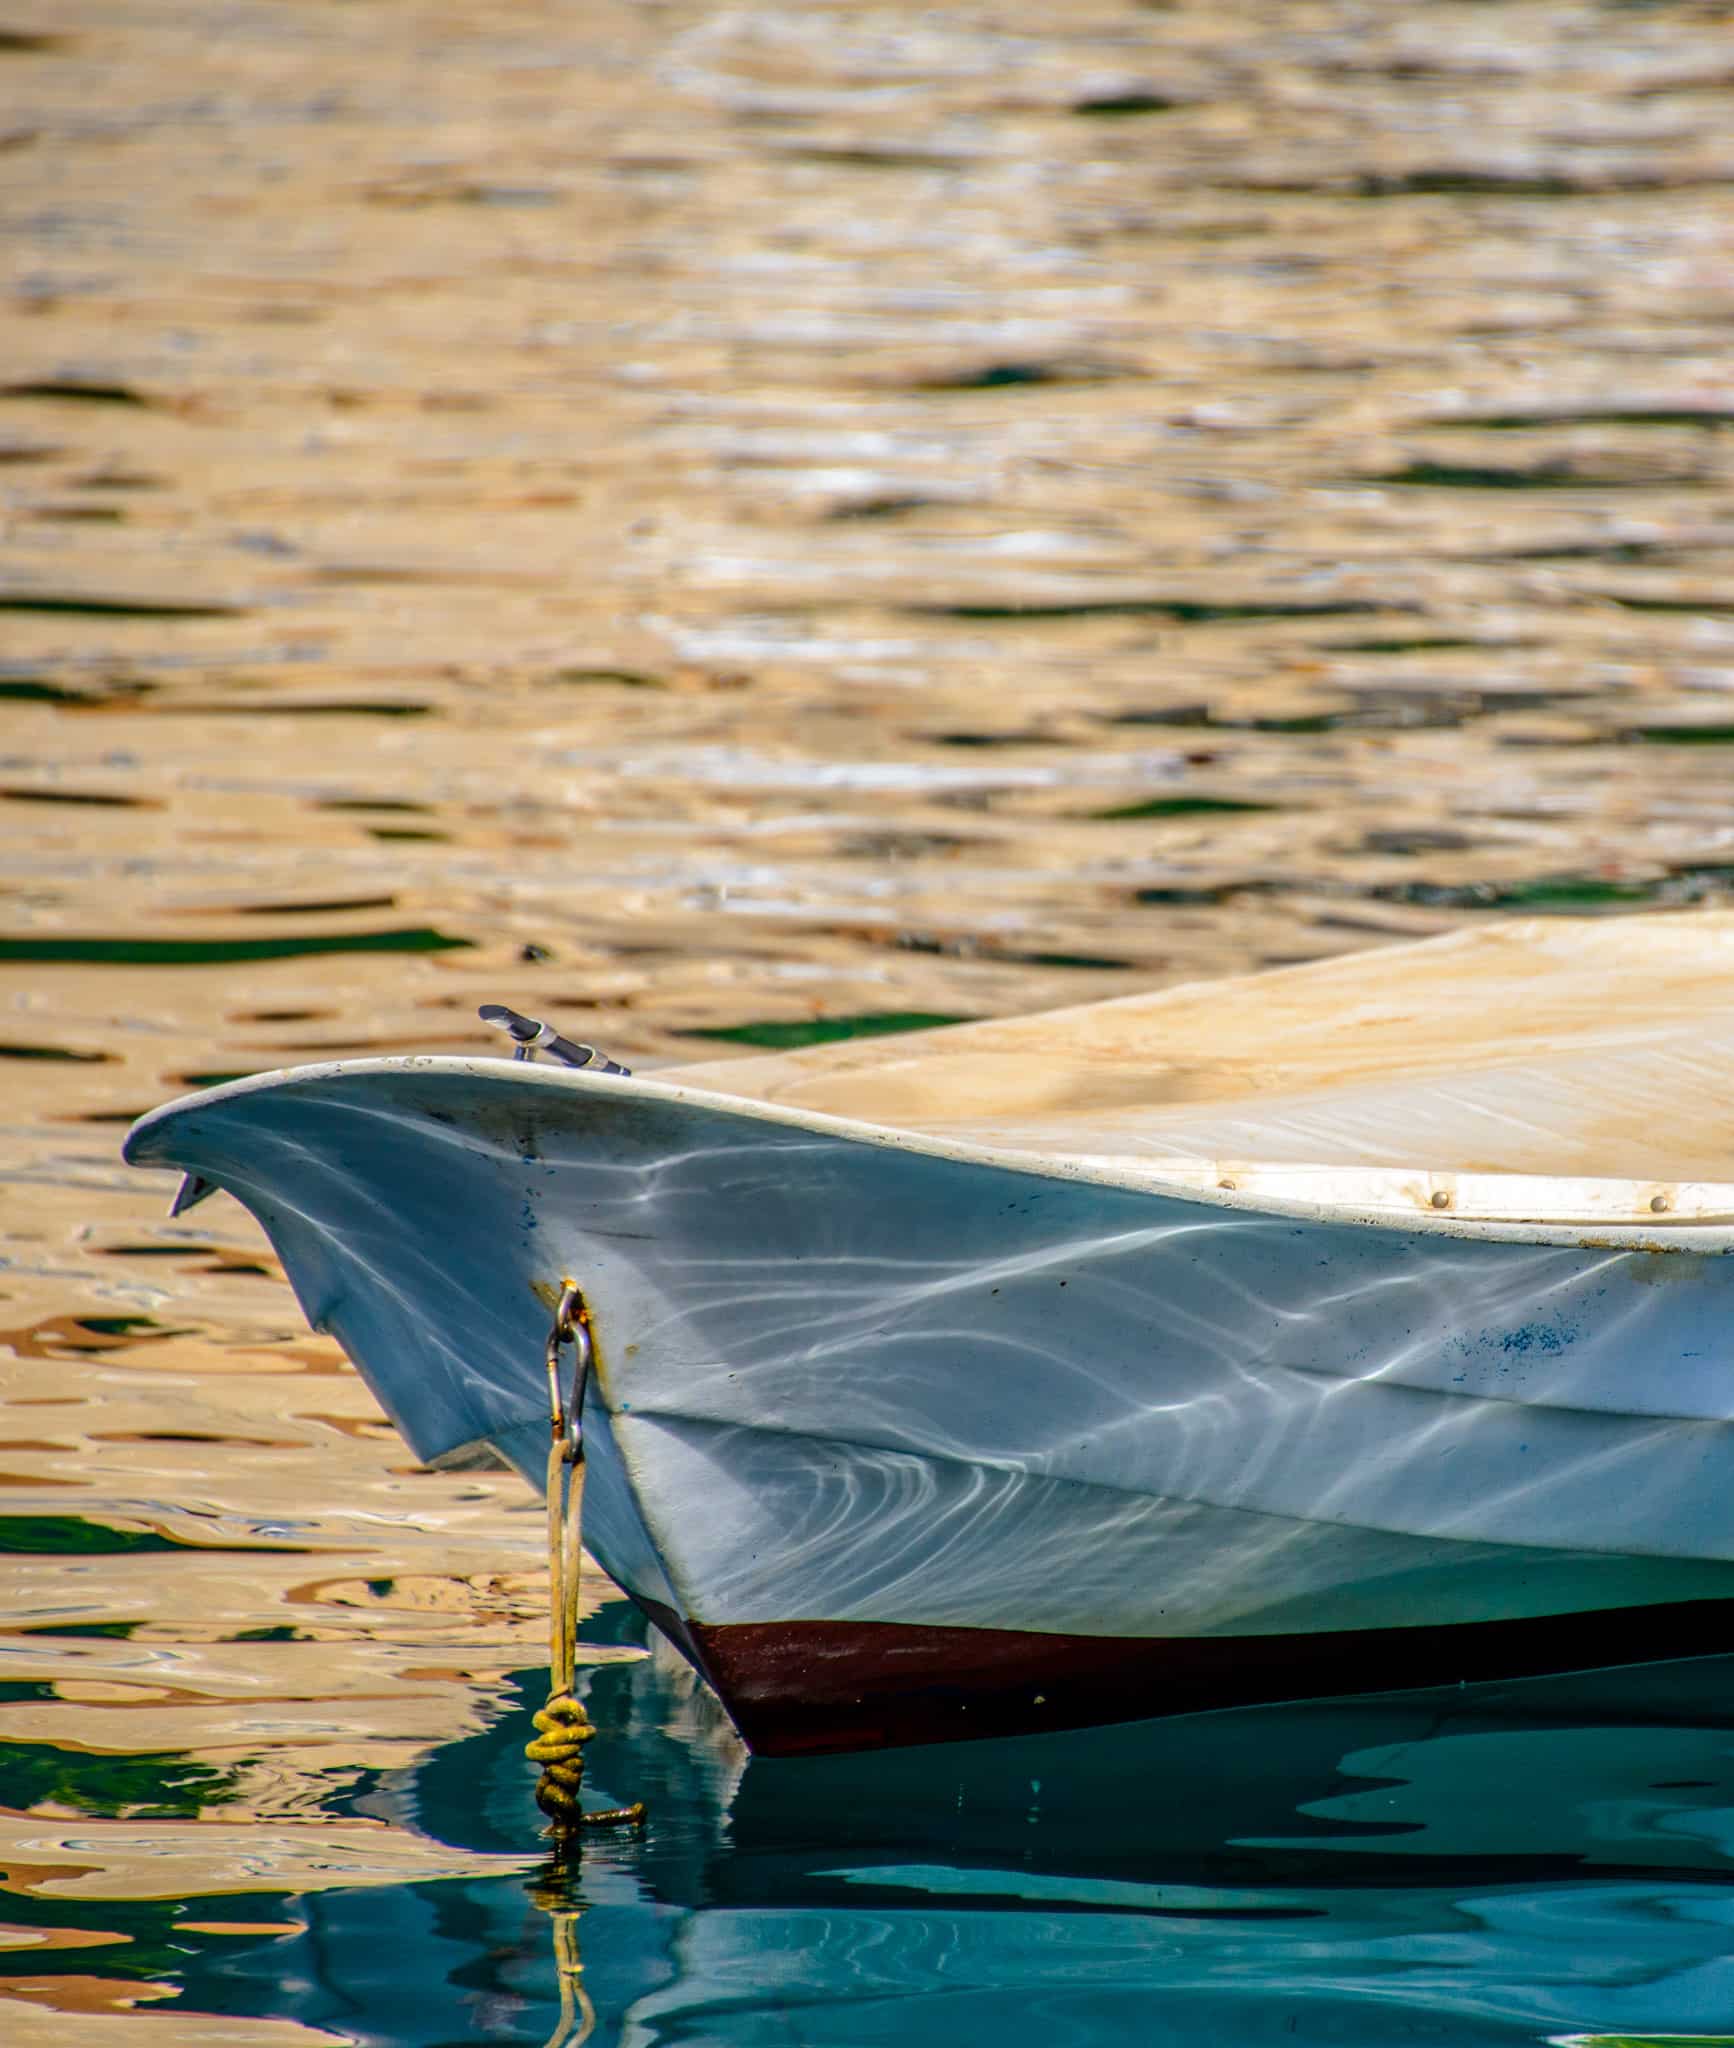 Sunlight reflecting off the water in the harbor of Dubrovnik Old Town adorns the bow of a moored rowboat.